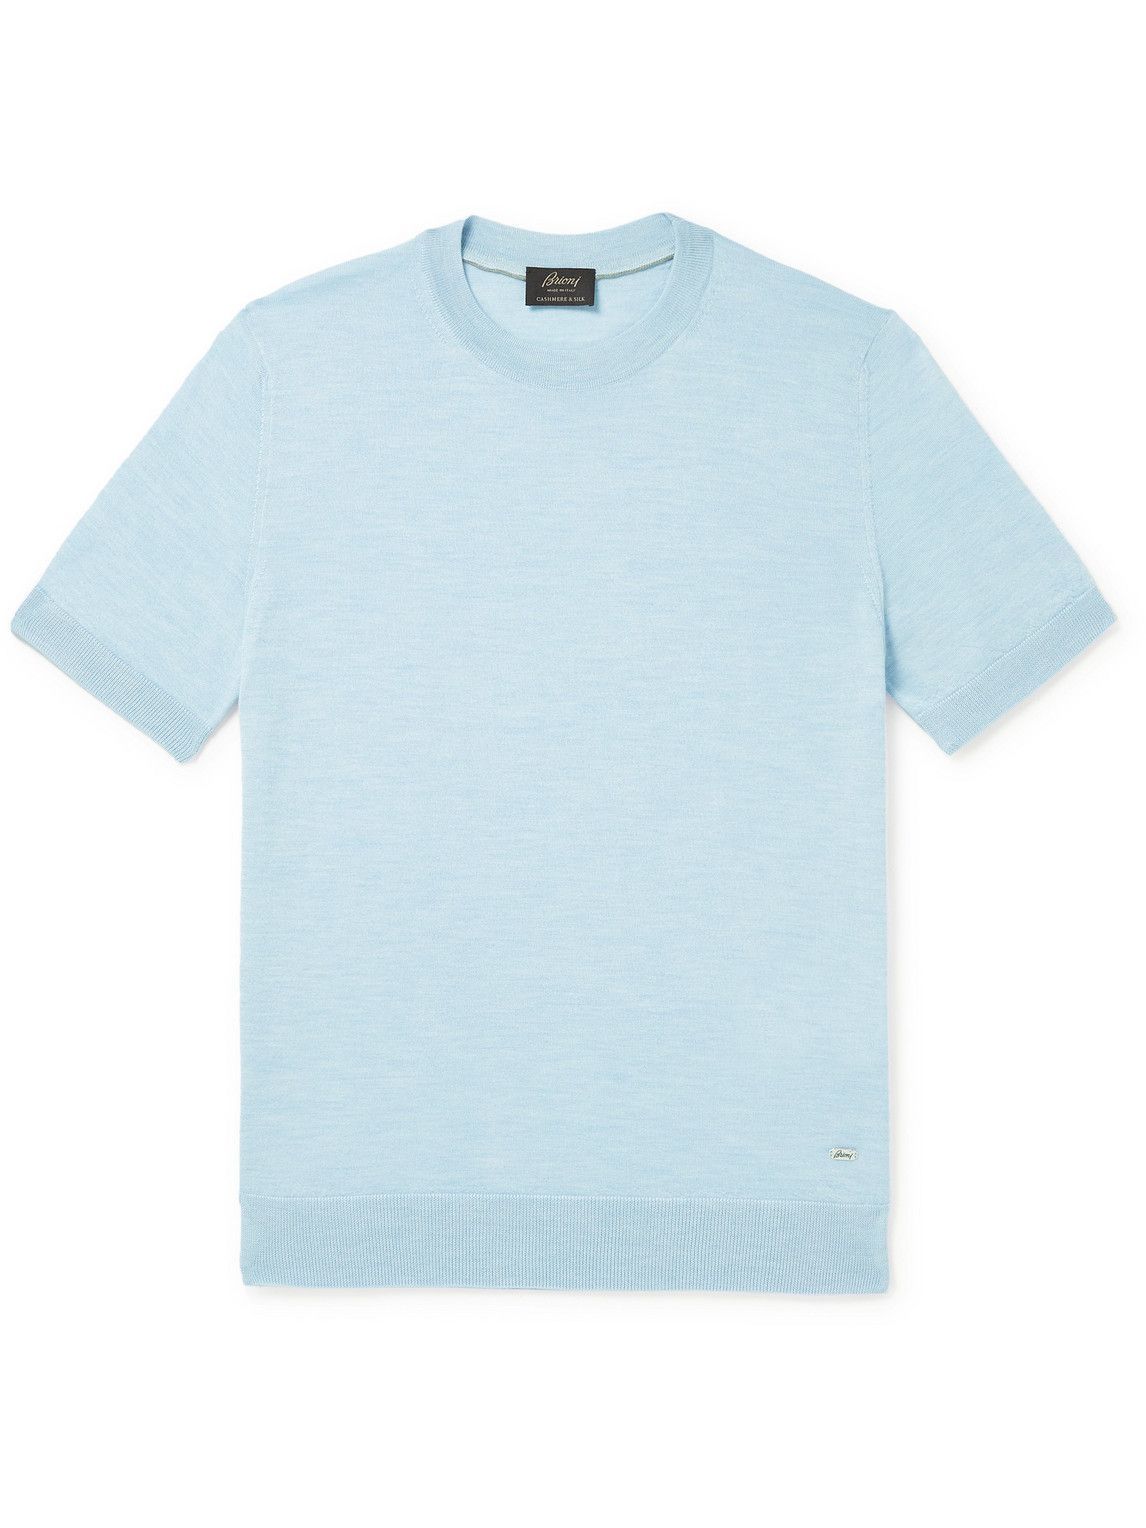 Brioni - Slim-Fit Logo-Embroidered Knitted Cotton T-Shirt - Men 